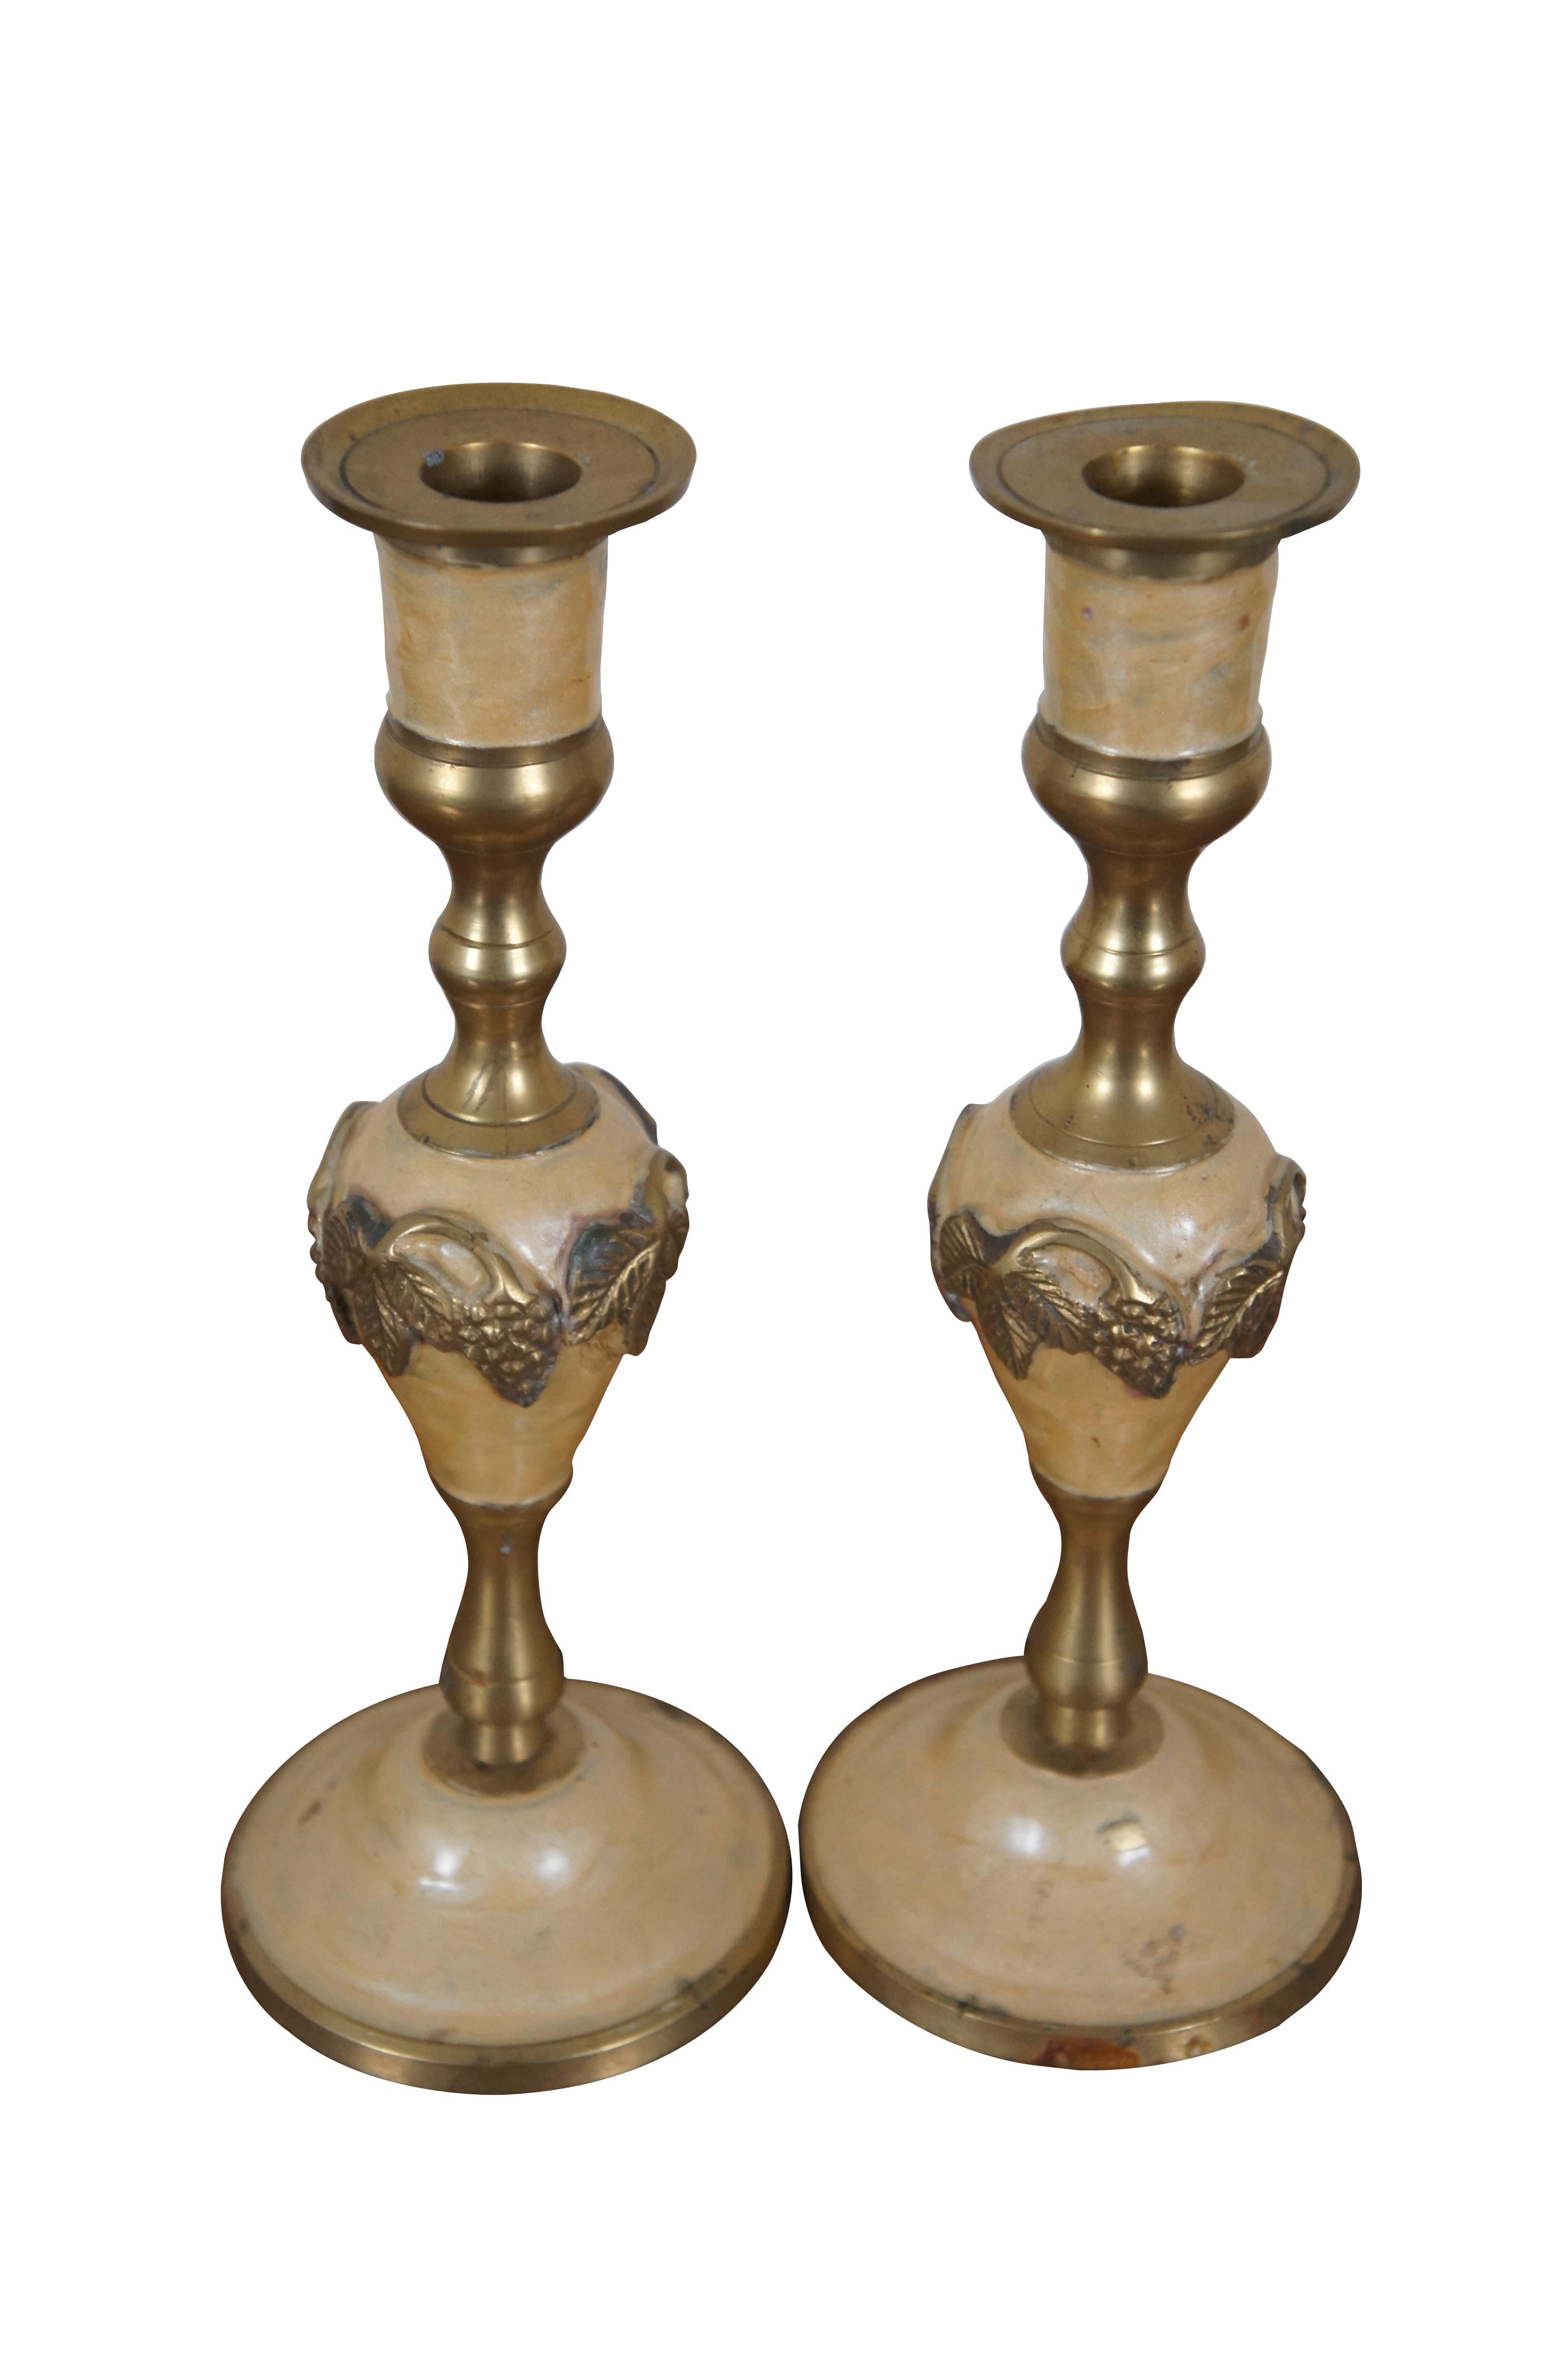 Two vintage enameled brass candlesticks or candle holders featuring a grape and leaves motif.

Dimensions:
3.75